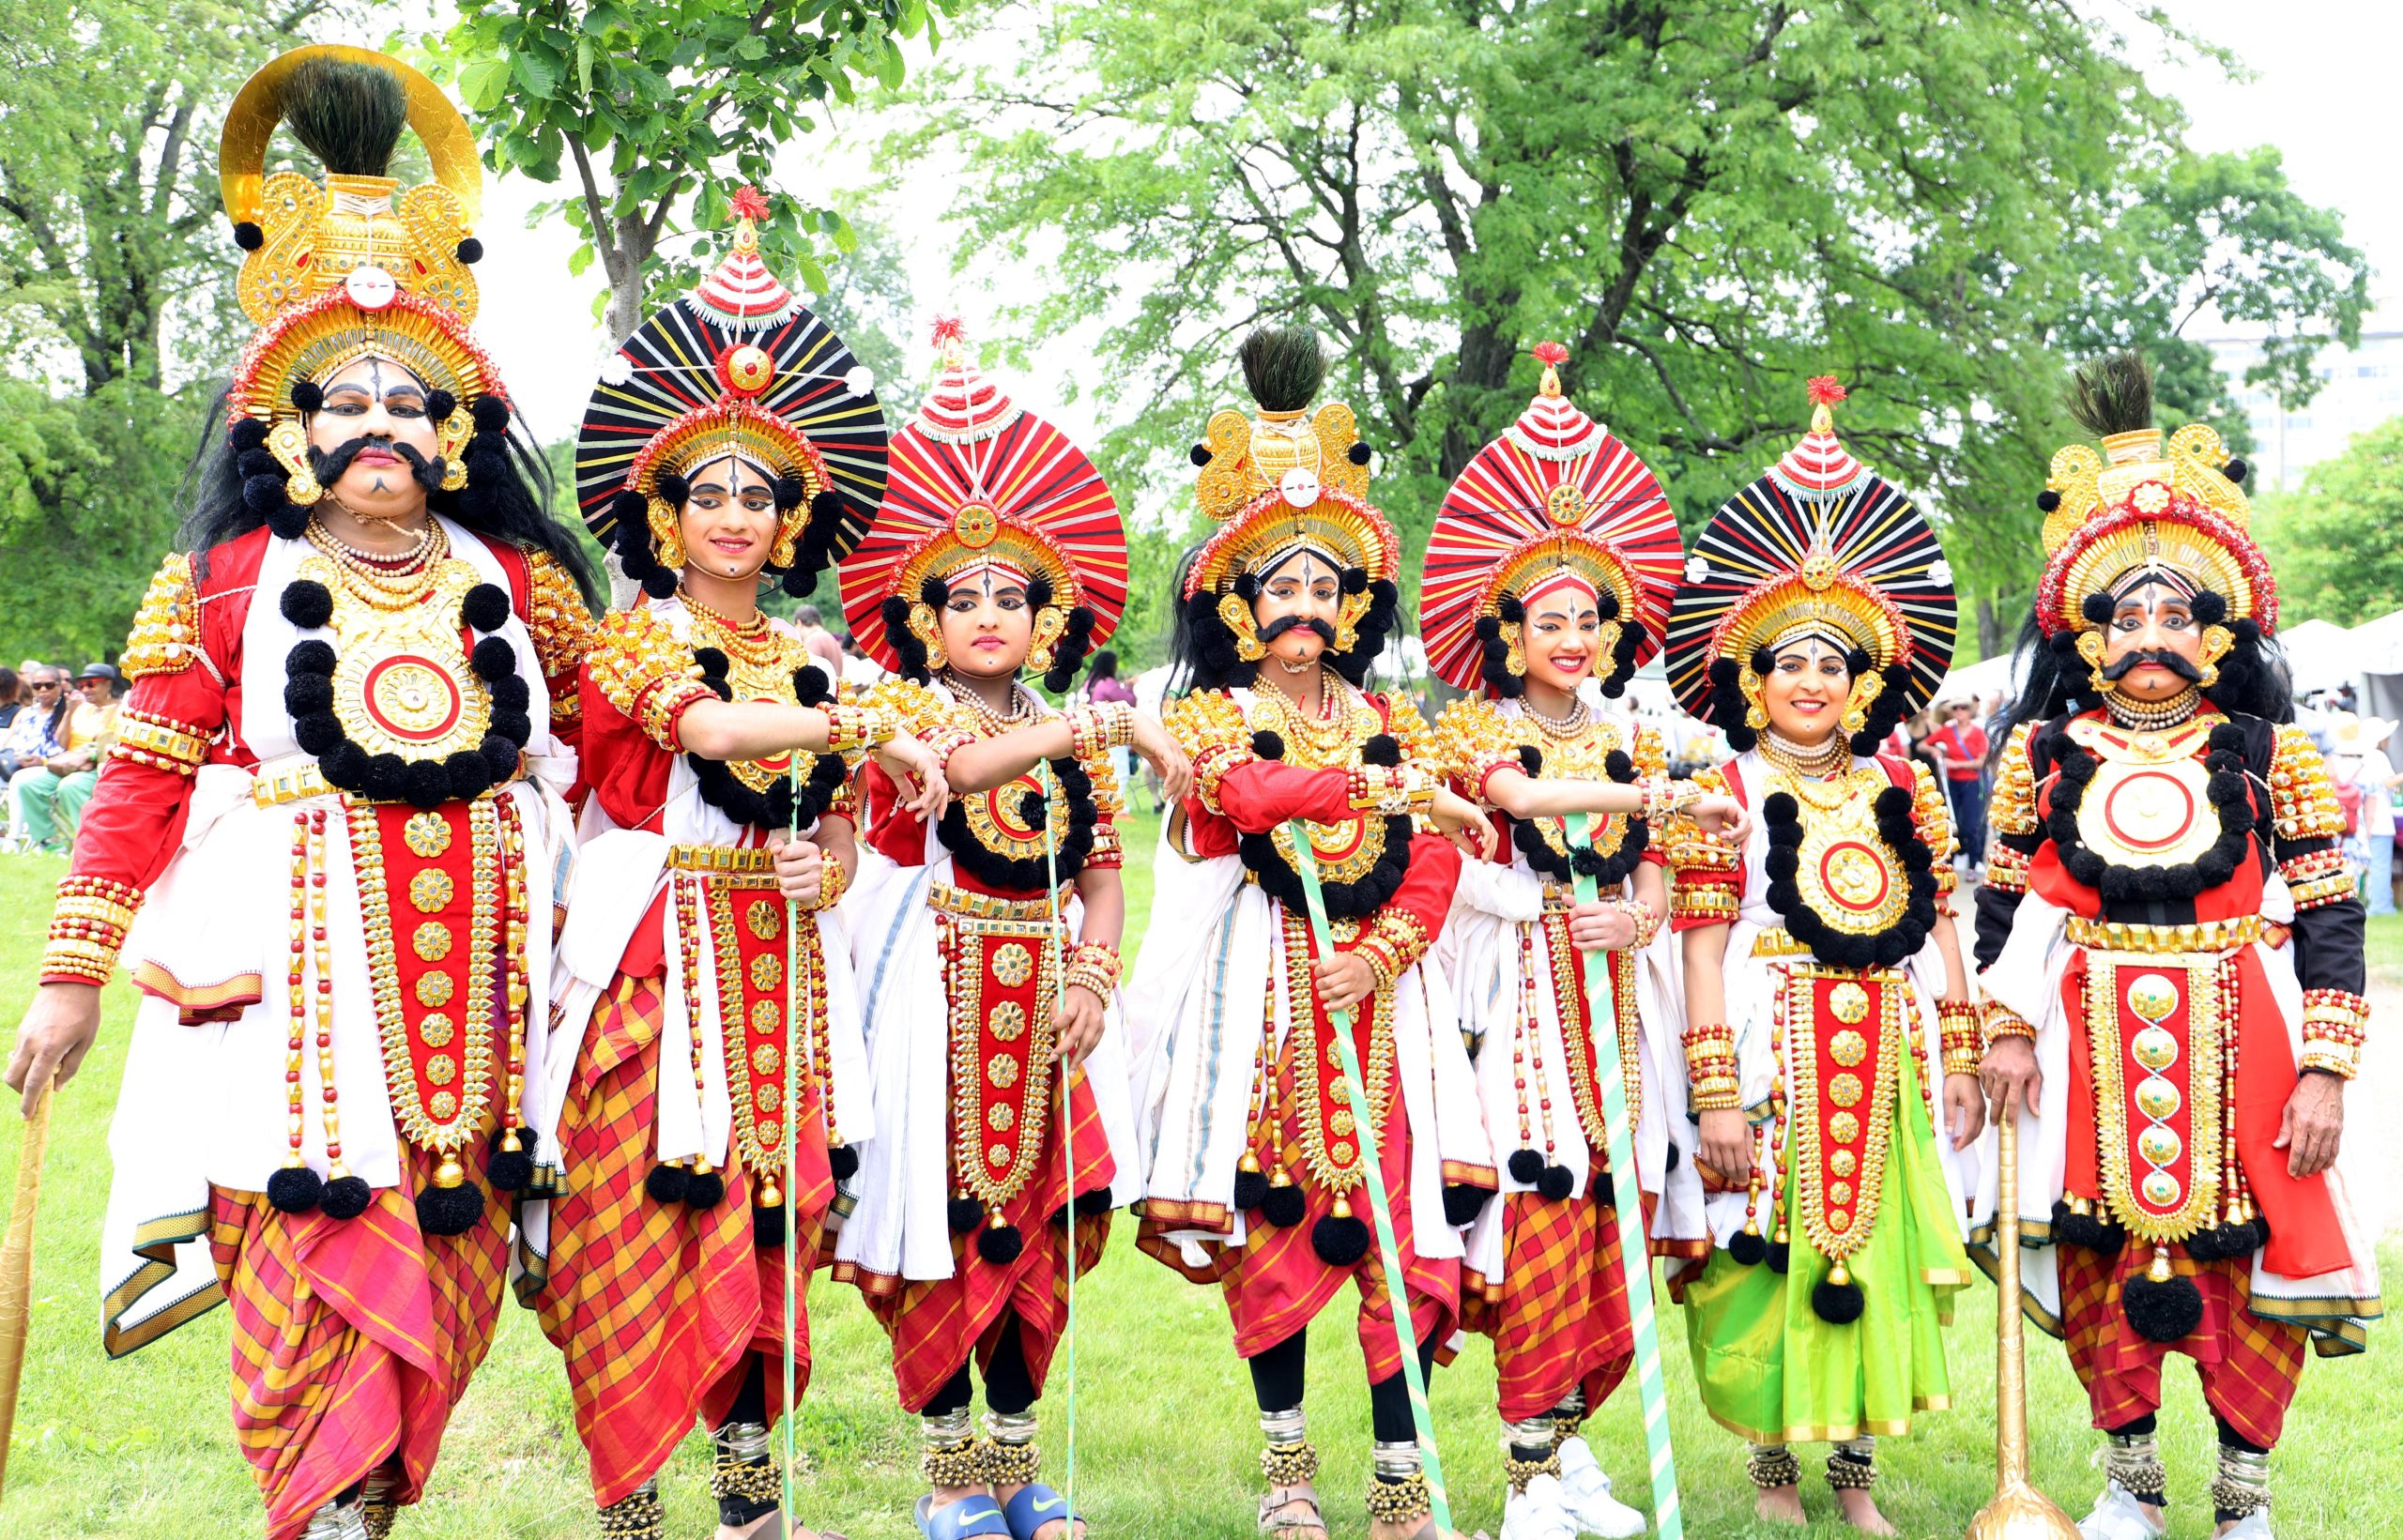 Yakshagana is a live traditional theater